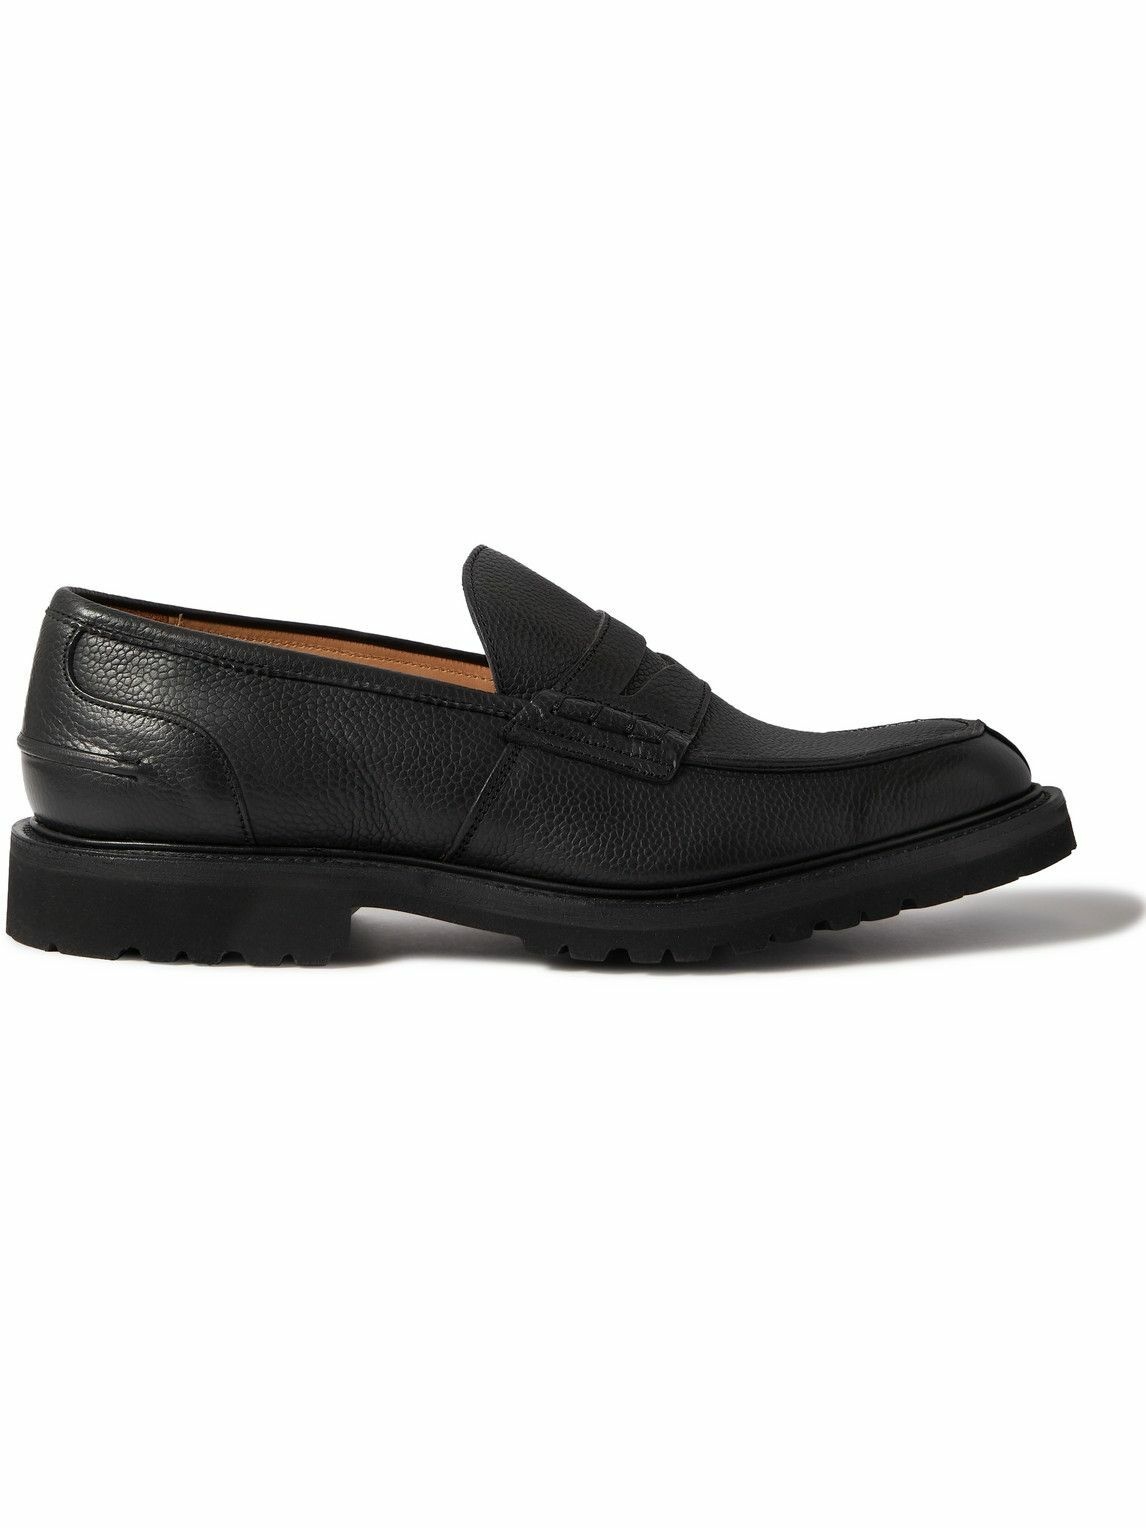 Photo: Tricker's - James Full-Grain Leather Penny Loafers - Black